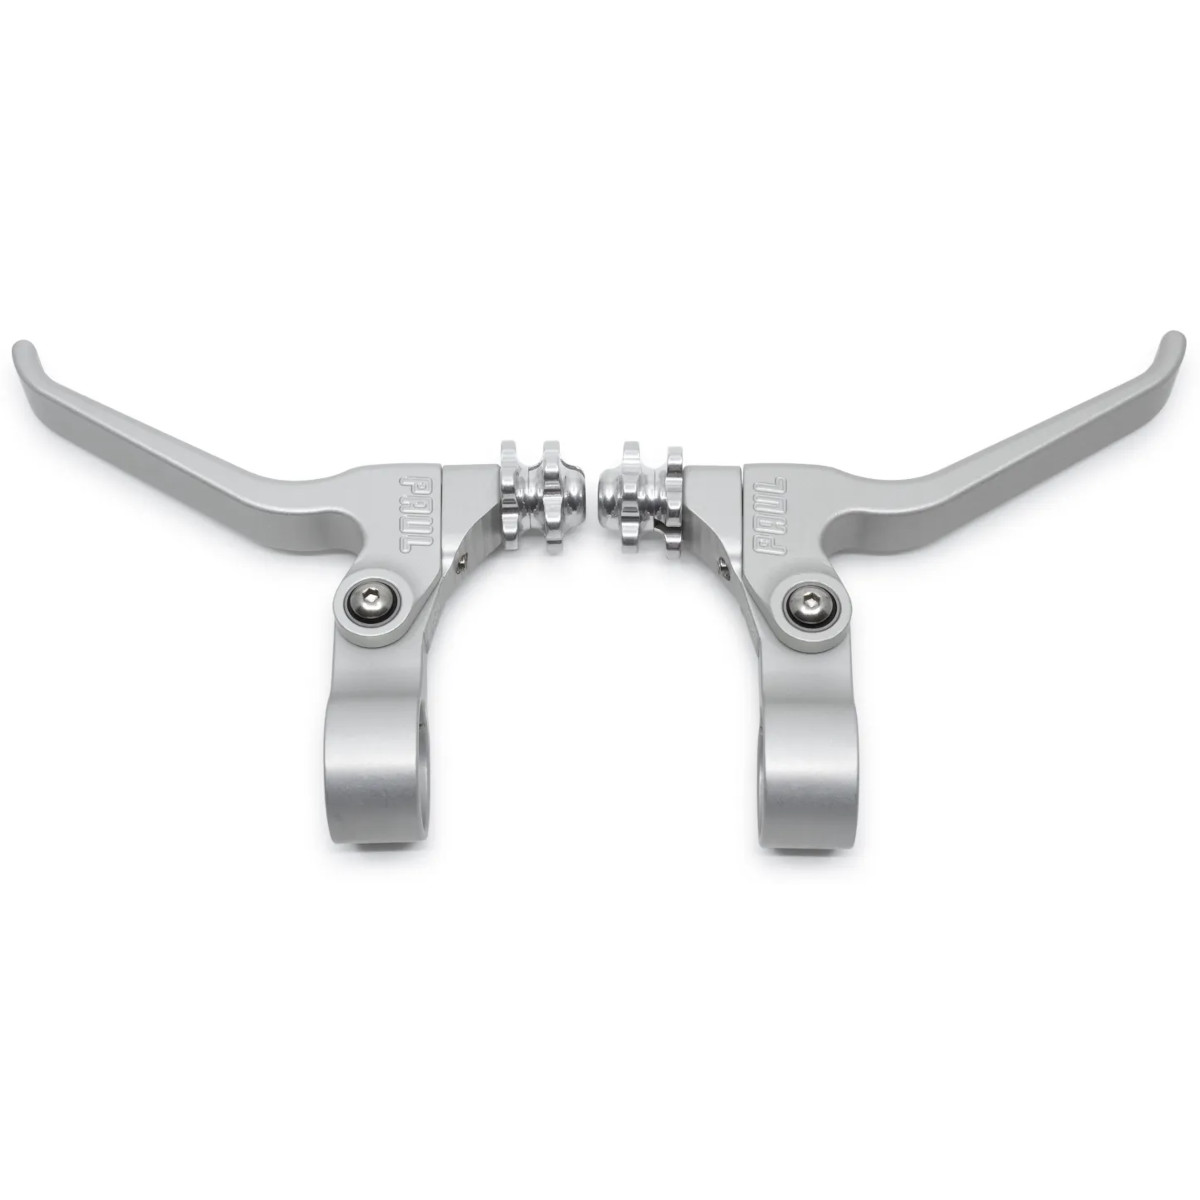 Image of Paul Component Canti Lever Brake Levers - Pair - silver